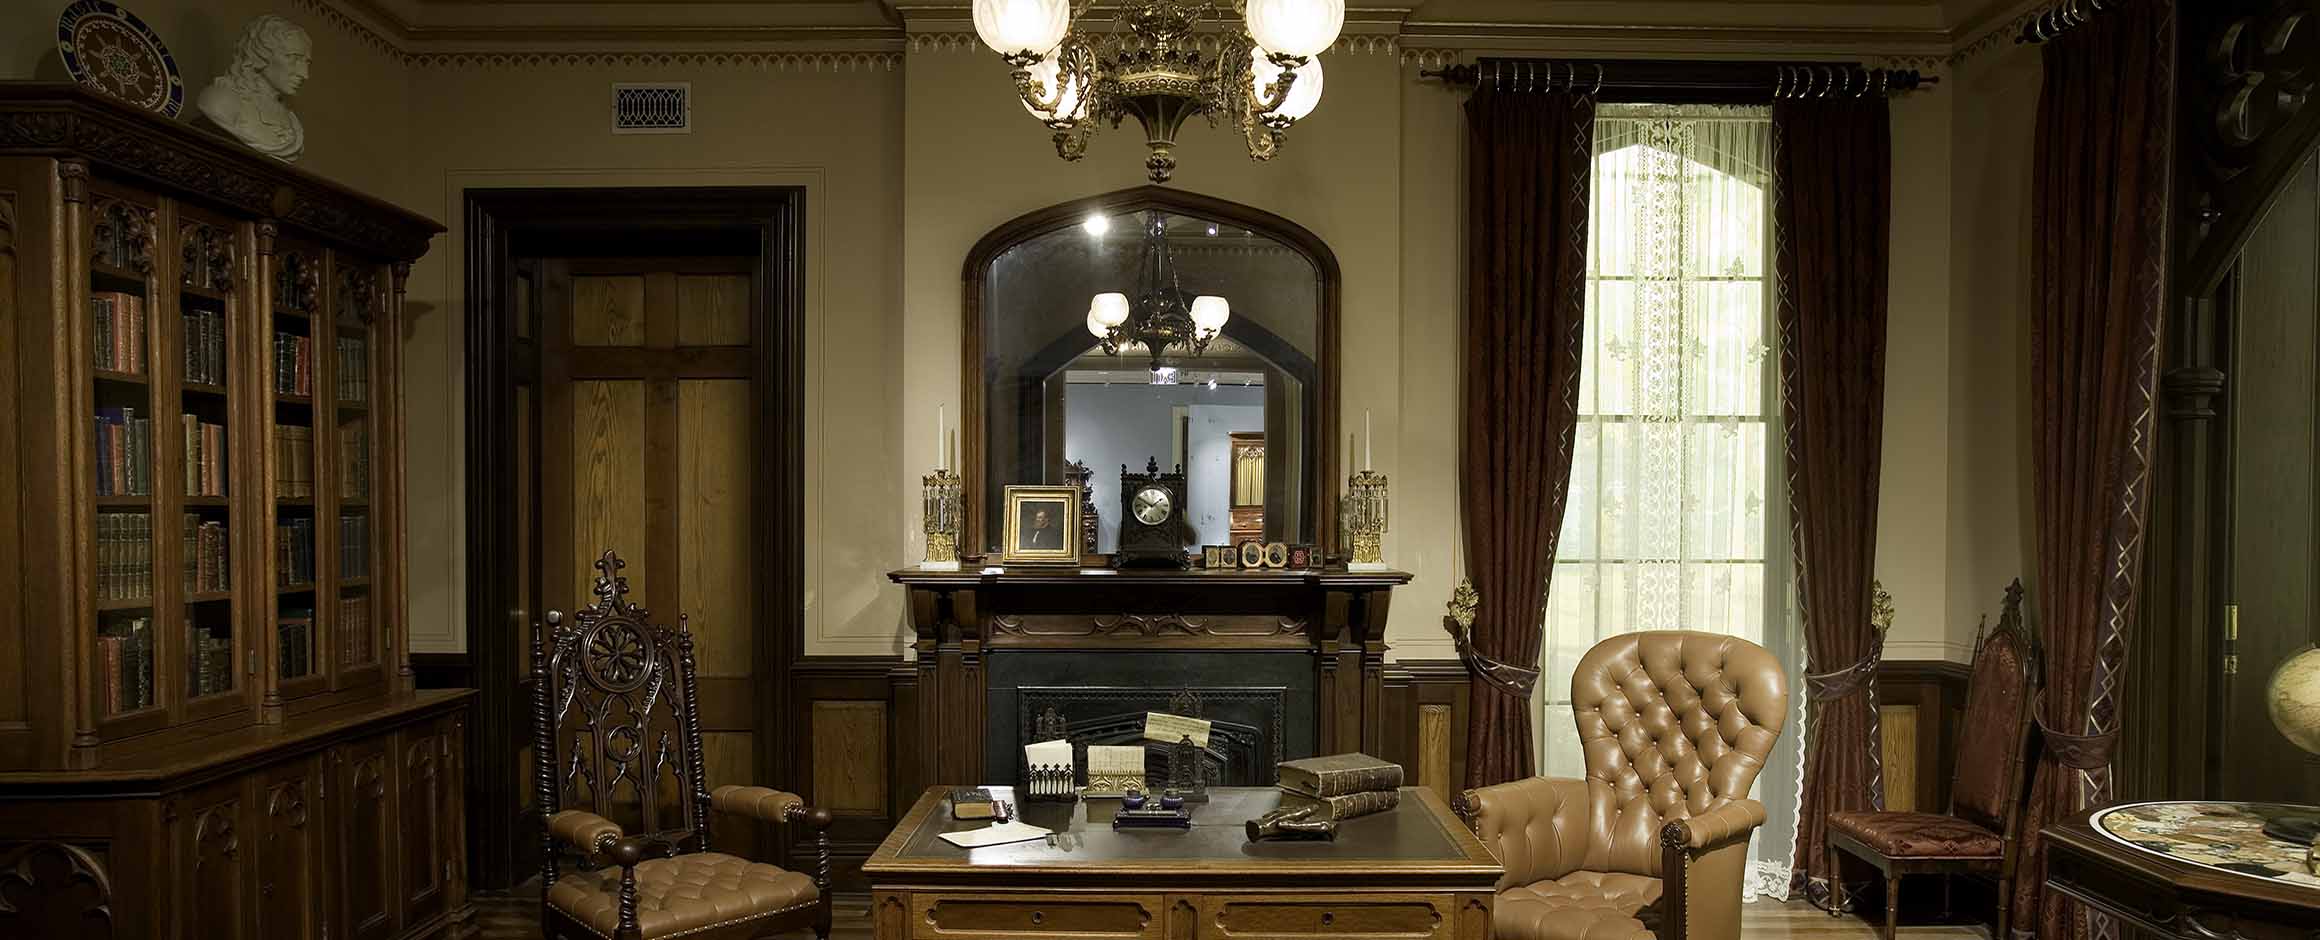 The desk in the Gothic Revival Library in front of the fireplace and looking glass